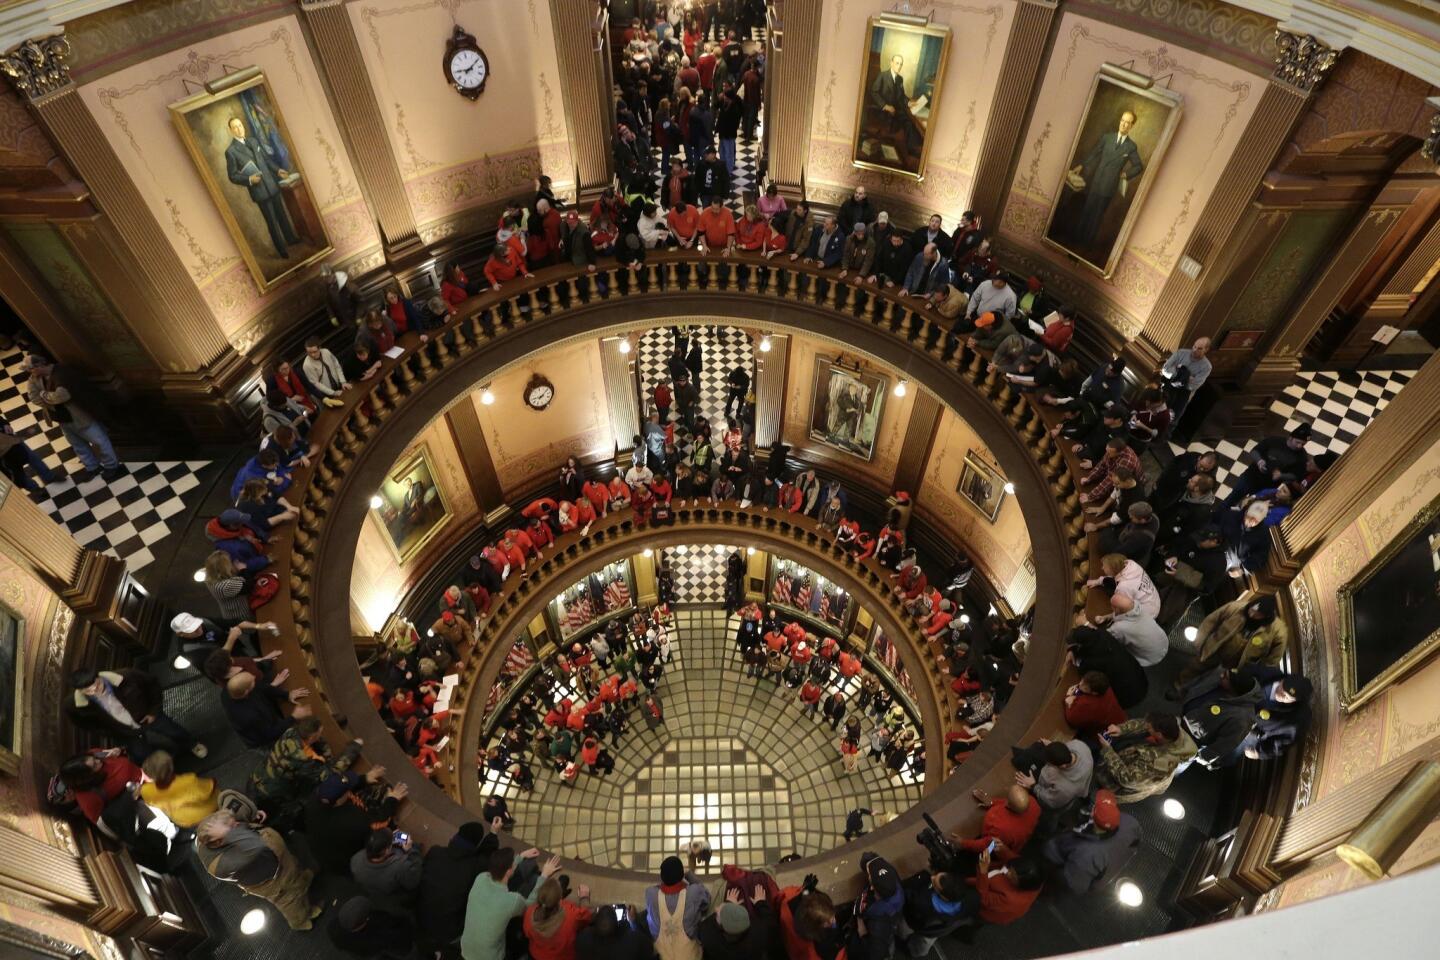 Protesters gather for a rally in the Michigan Capitol rotunda in Lansing.